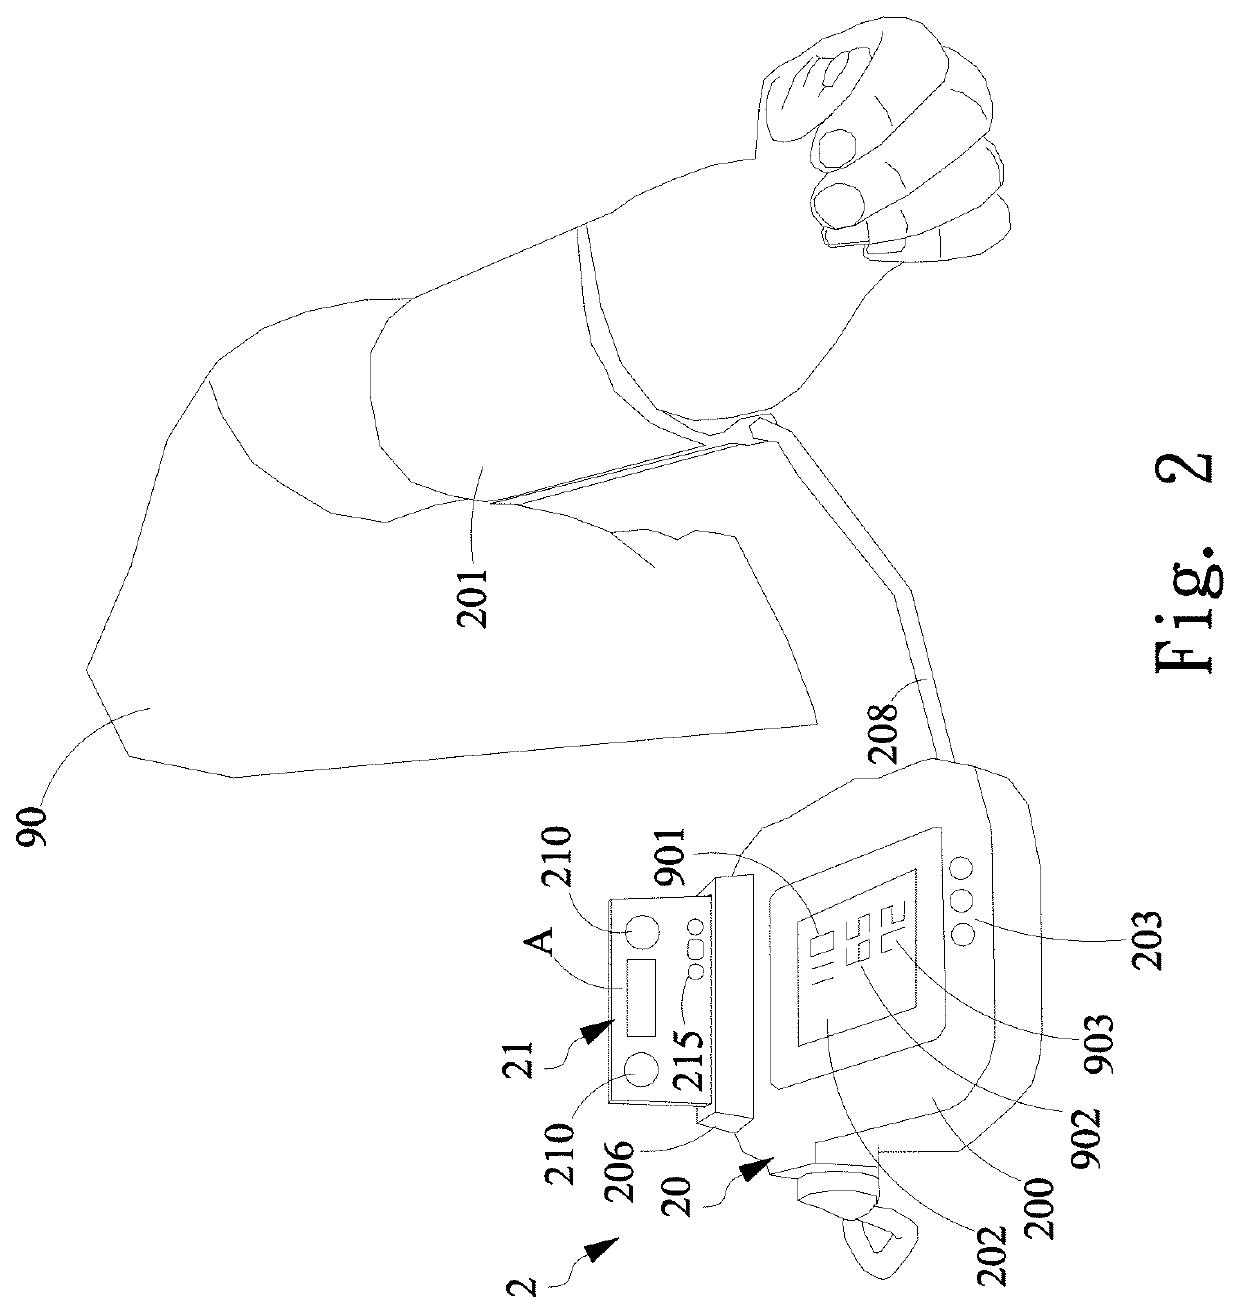 Smart personal portable blood pressure measuring system and method for calibrating blood pressure measurement using the same